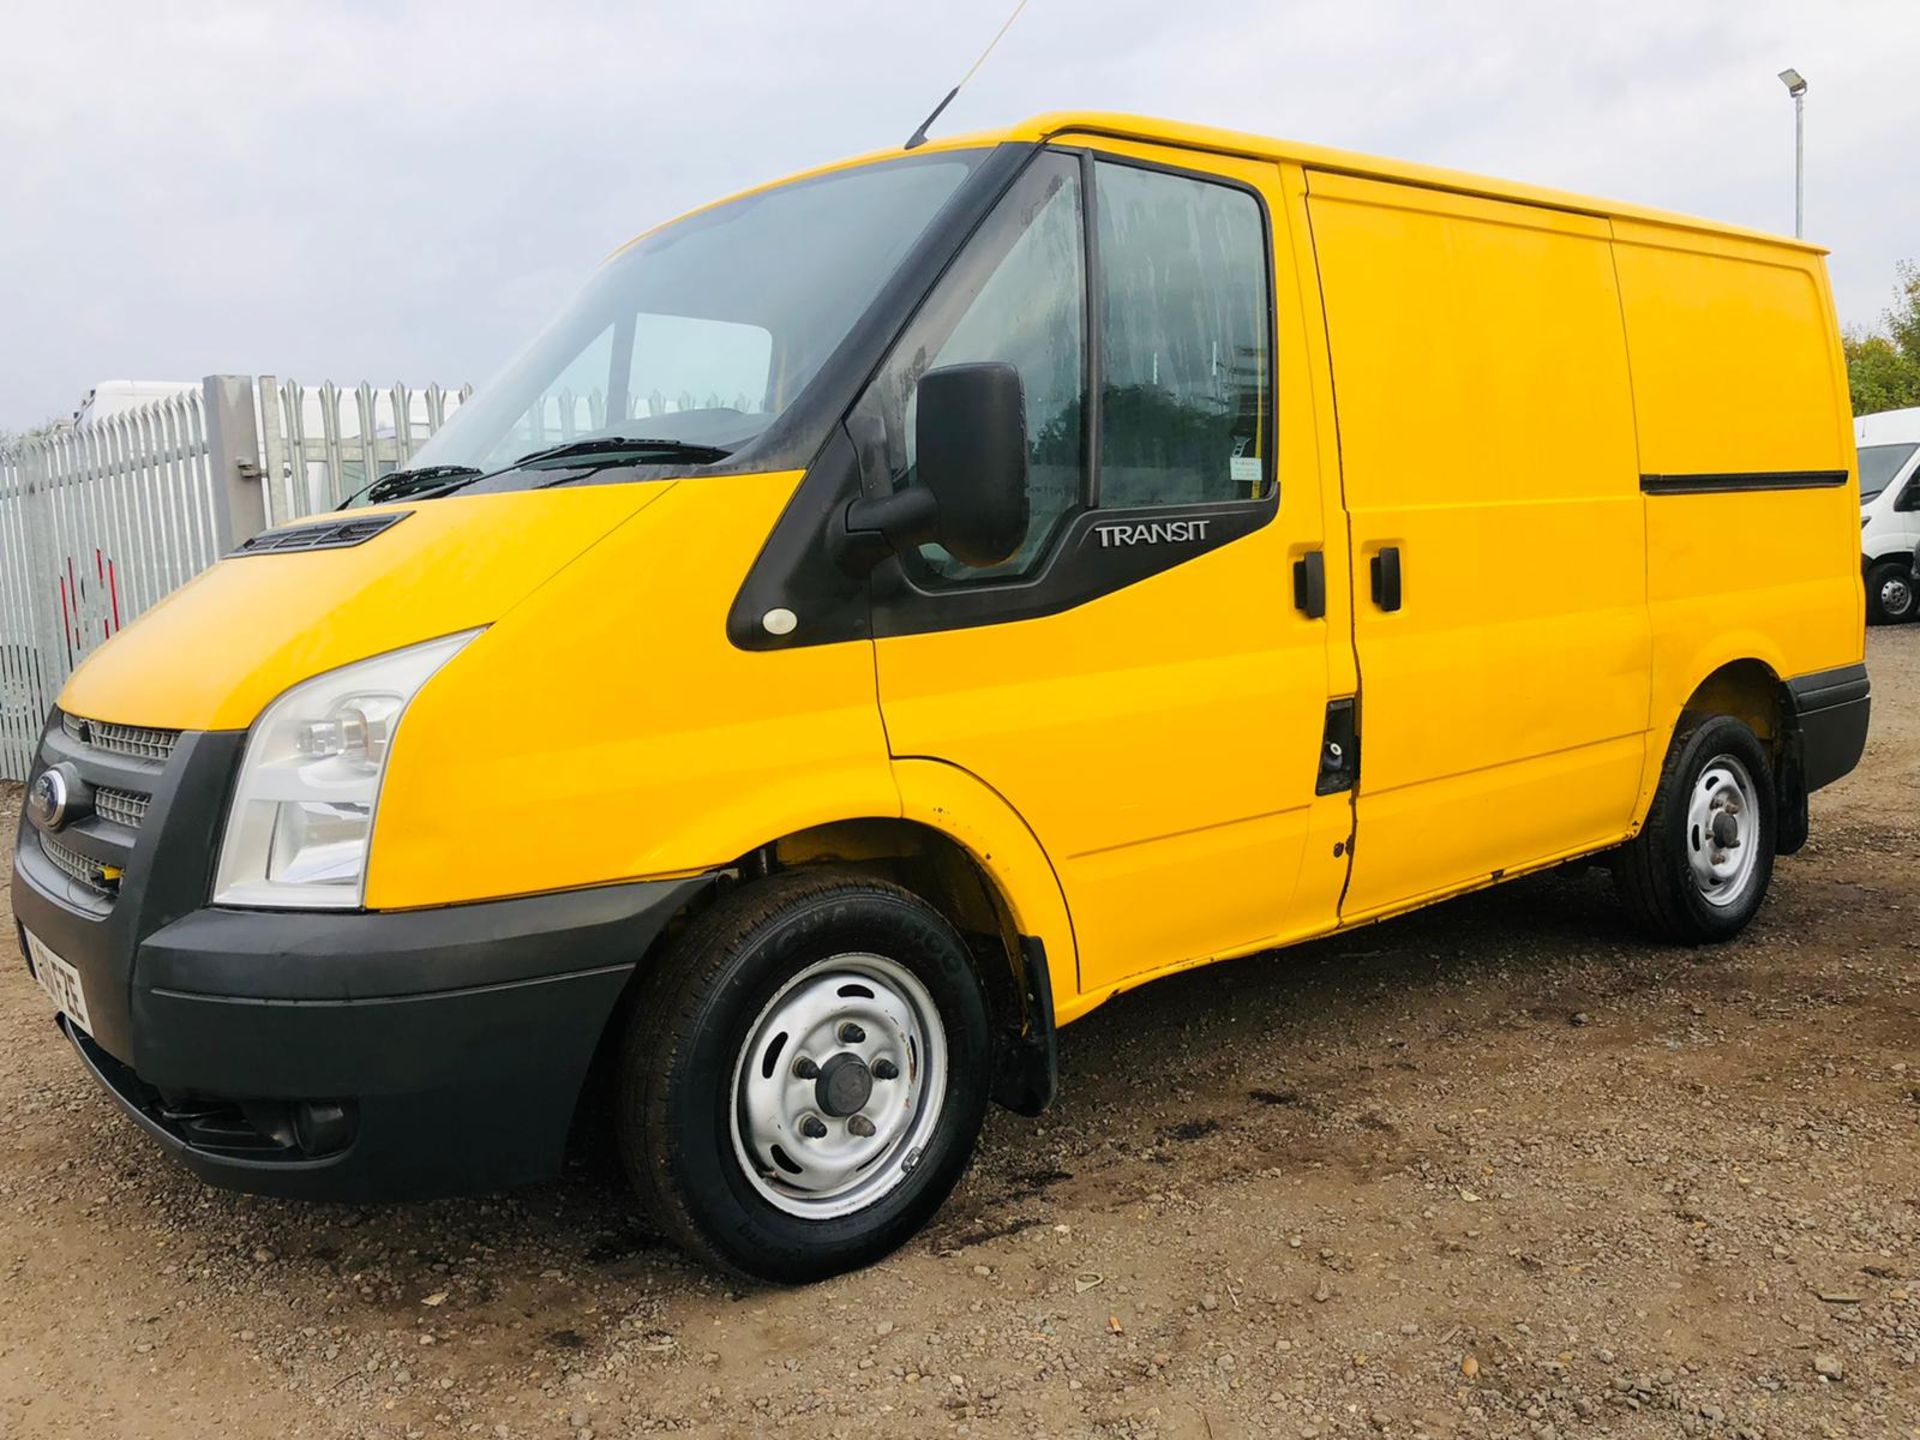 Ford Transit 2.2 TDCI 125 T300 L1 H1 FWD 2011 '61 Reg' Air Con - Elec Pack - No Vat Save 20% - Image 12 of 32